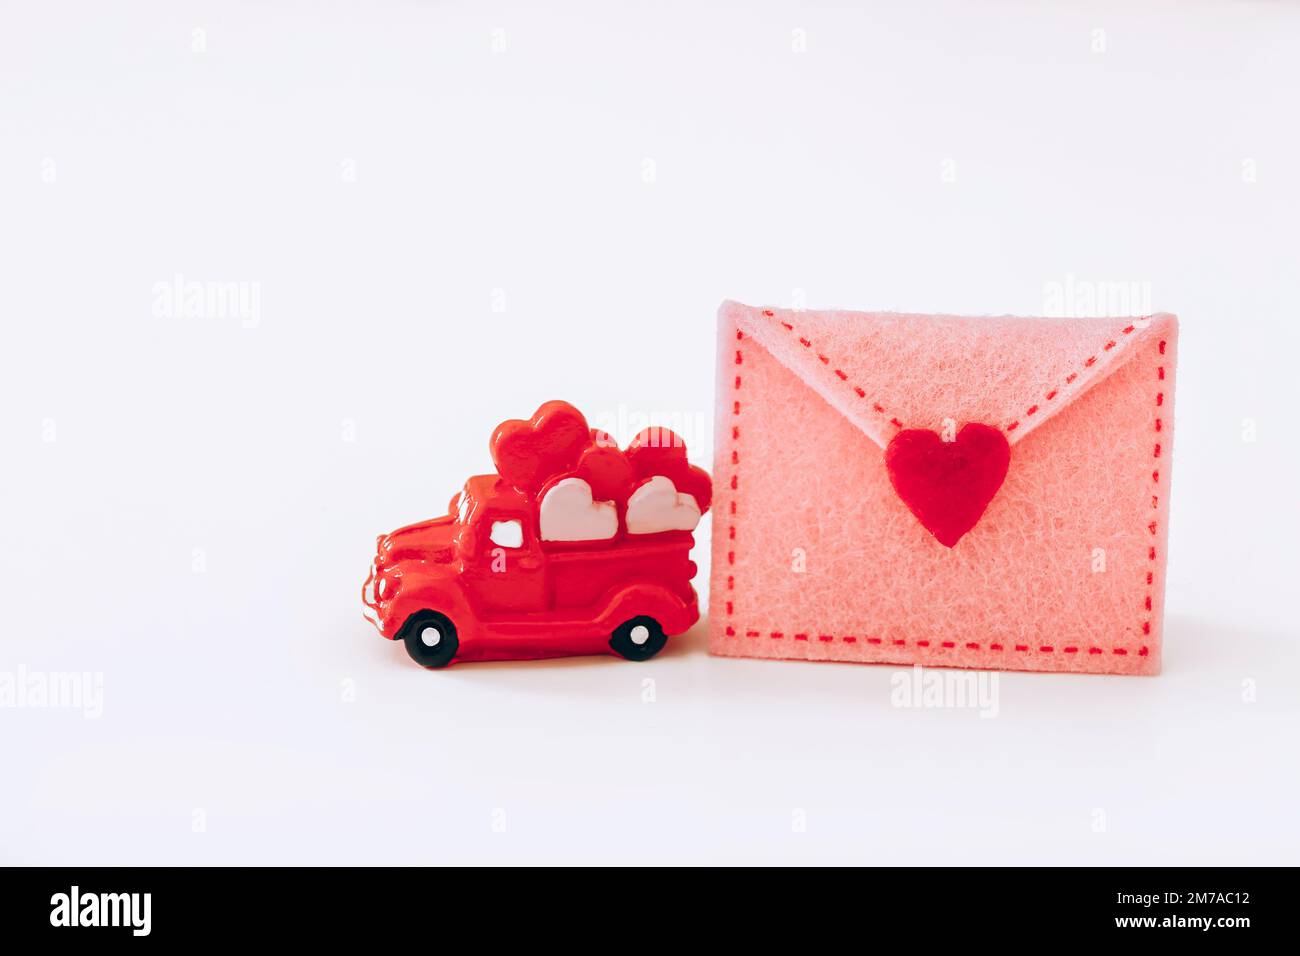 Miniature red car with hearts and felt envelope on white background. Valentine Day Stock Photo